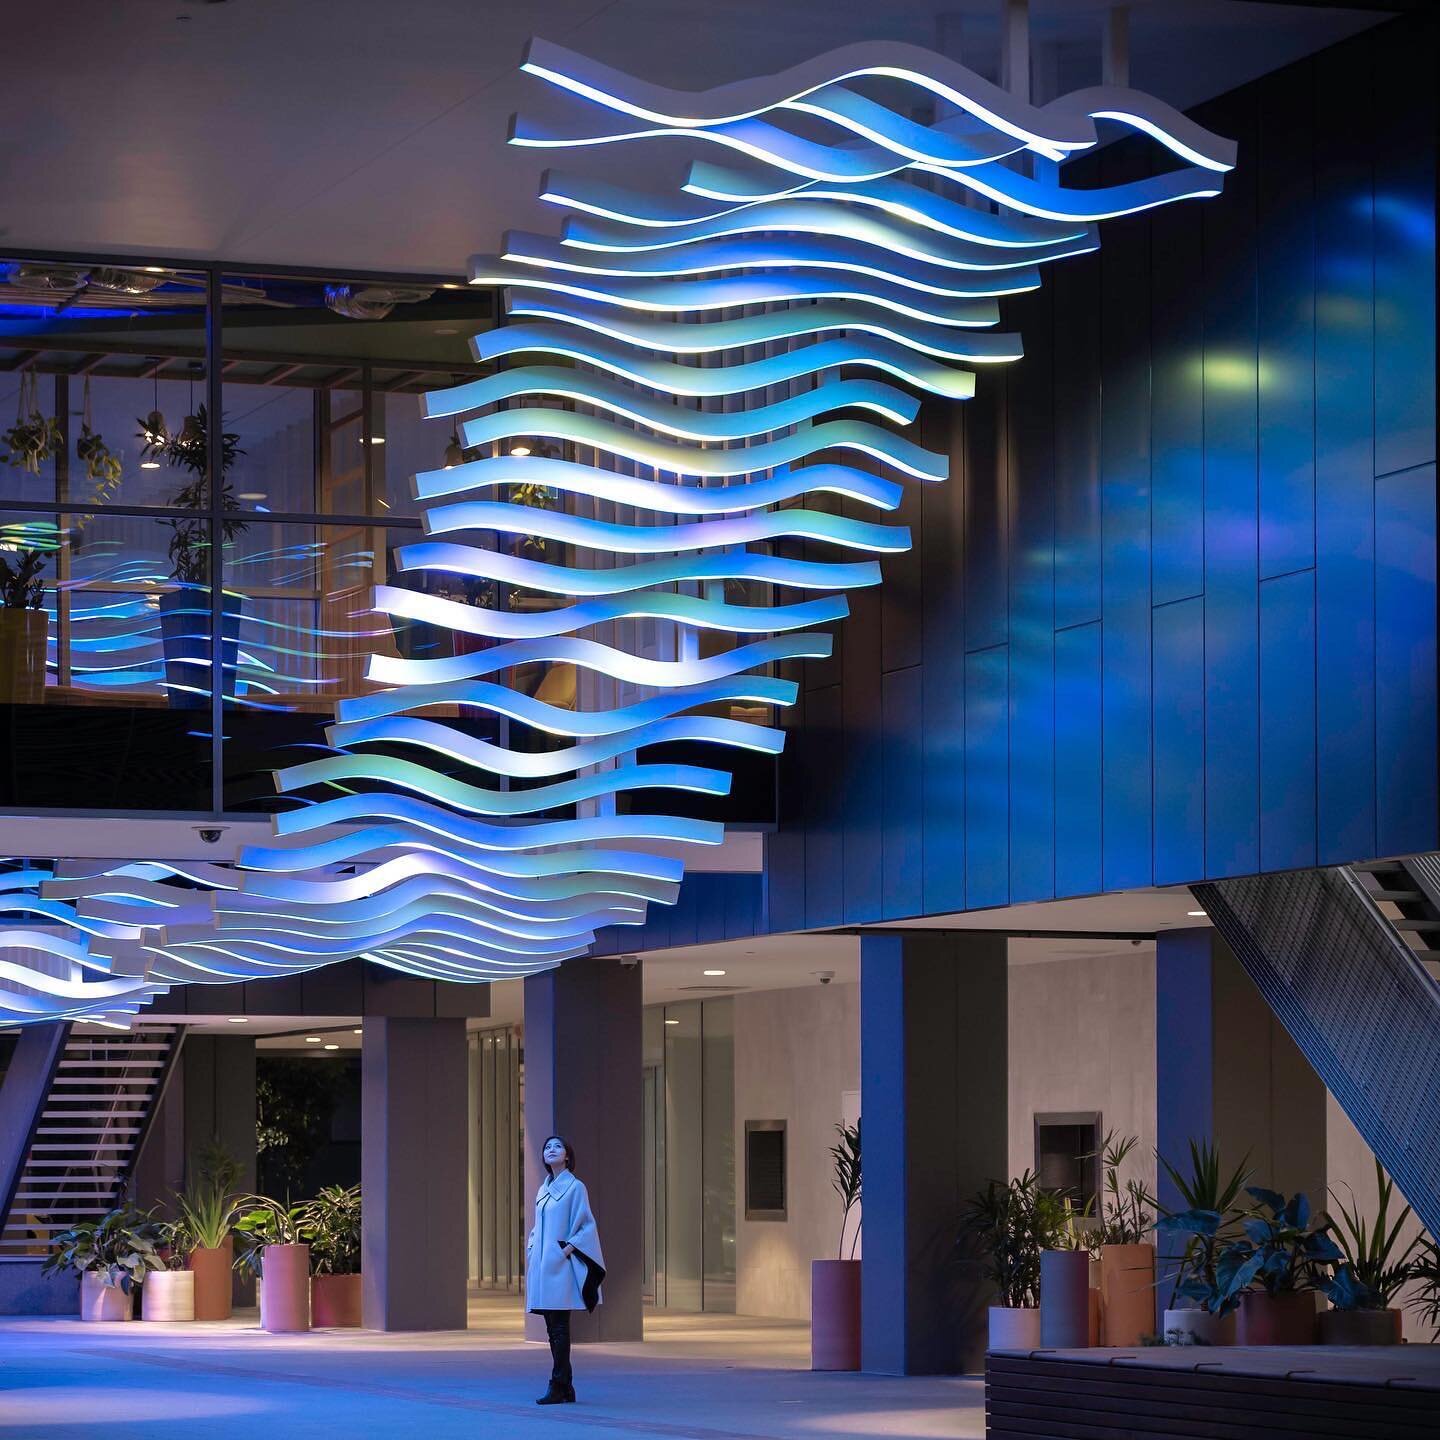 And just like that our newest permanent public artwork Waterbody in Pyrmont, Sydney is illuminating its part of the planet. Our fantastic client @mirvac_portfolio commissioned the piece to lighten a dark undercroft next to its primary tenant @google 